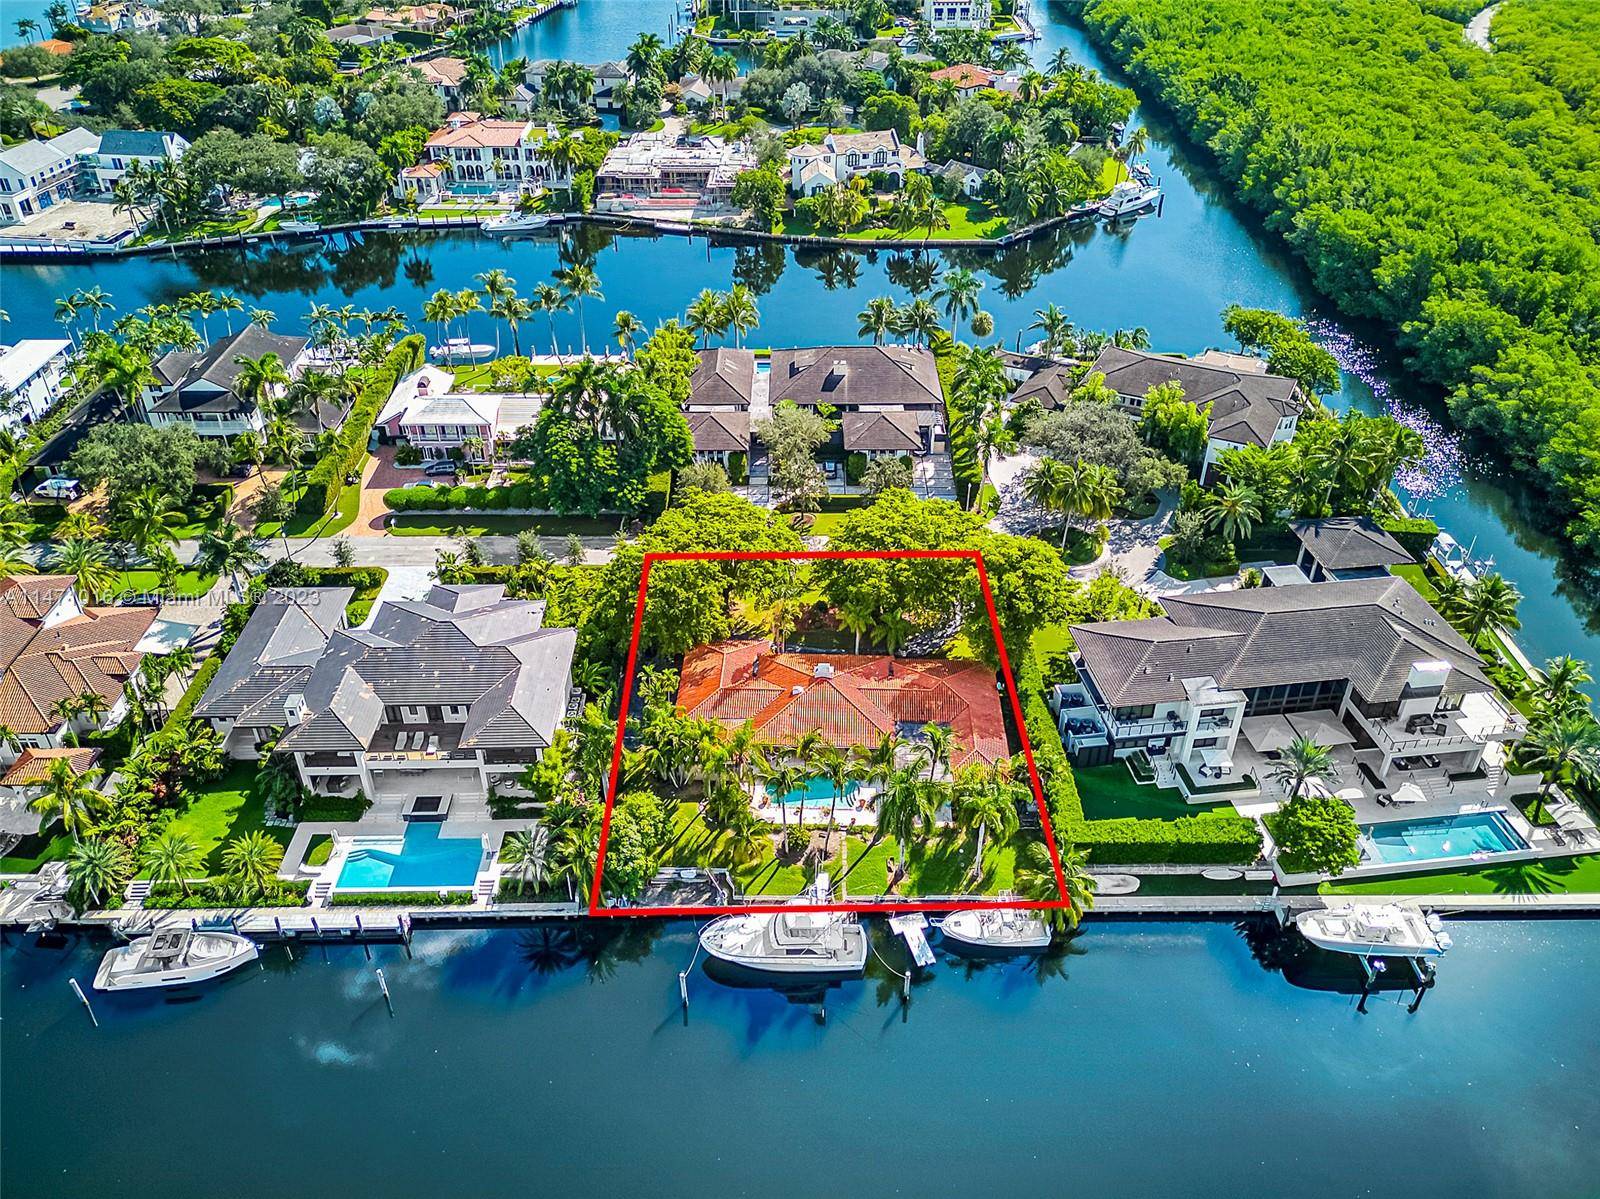 Welcome to the exclusive private and gaurded community of Old Cutler Bay, this is a rare jewel waterfront home available for the first time in 37 years.